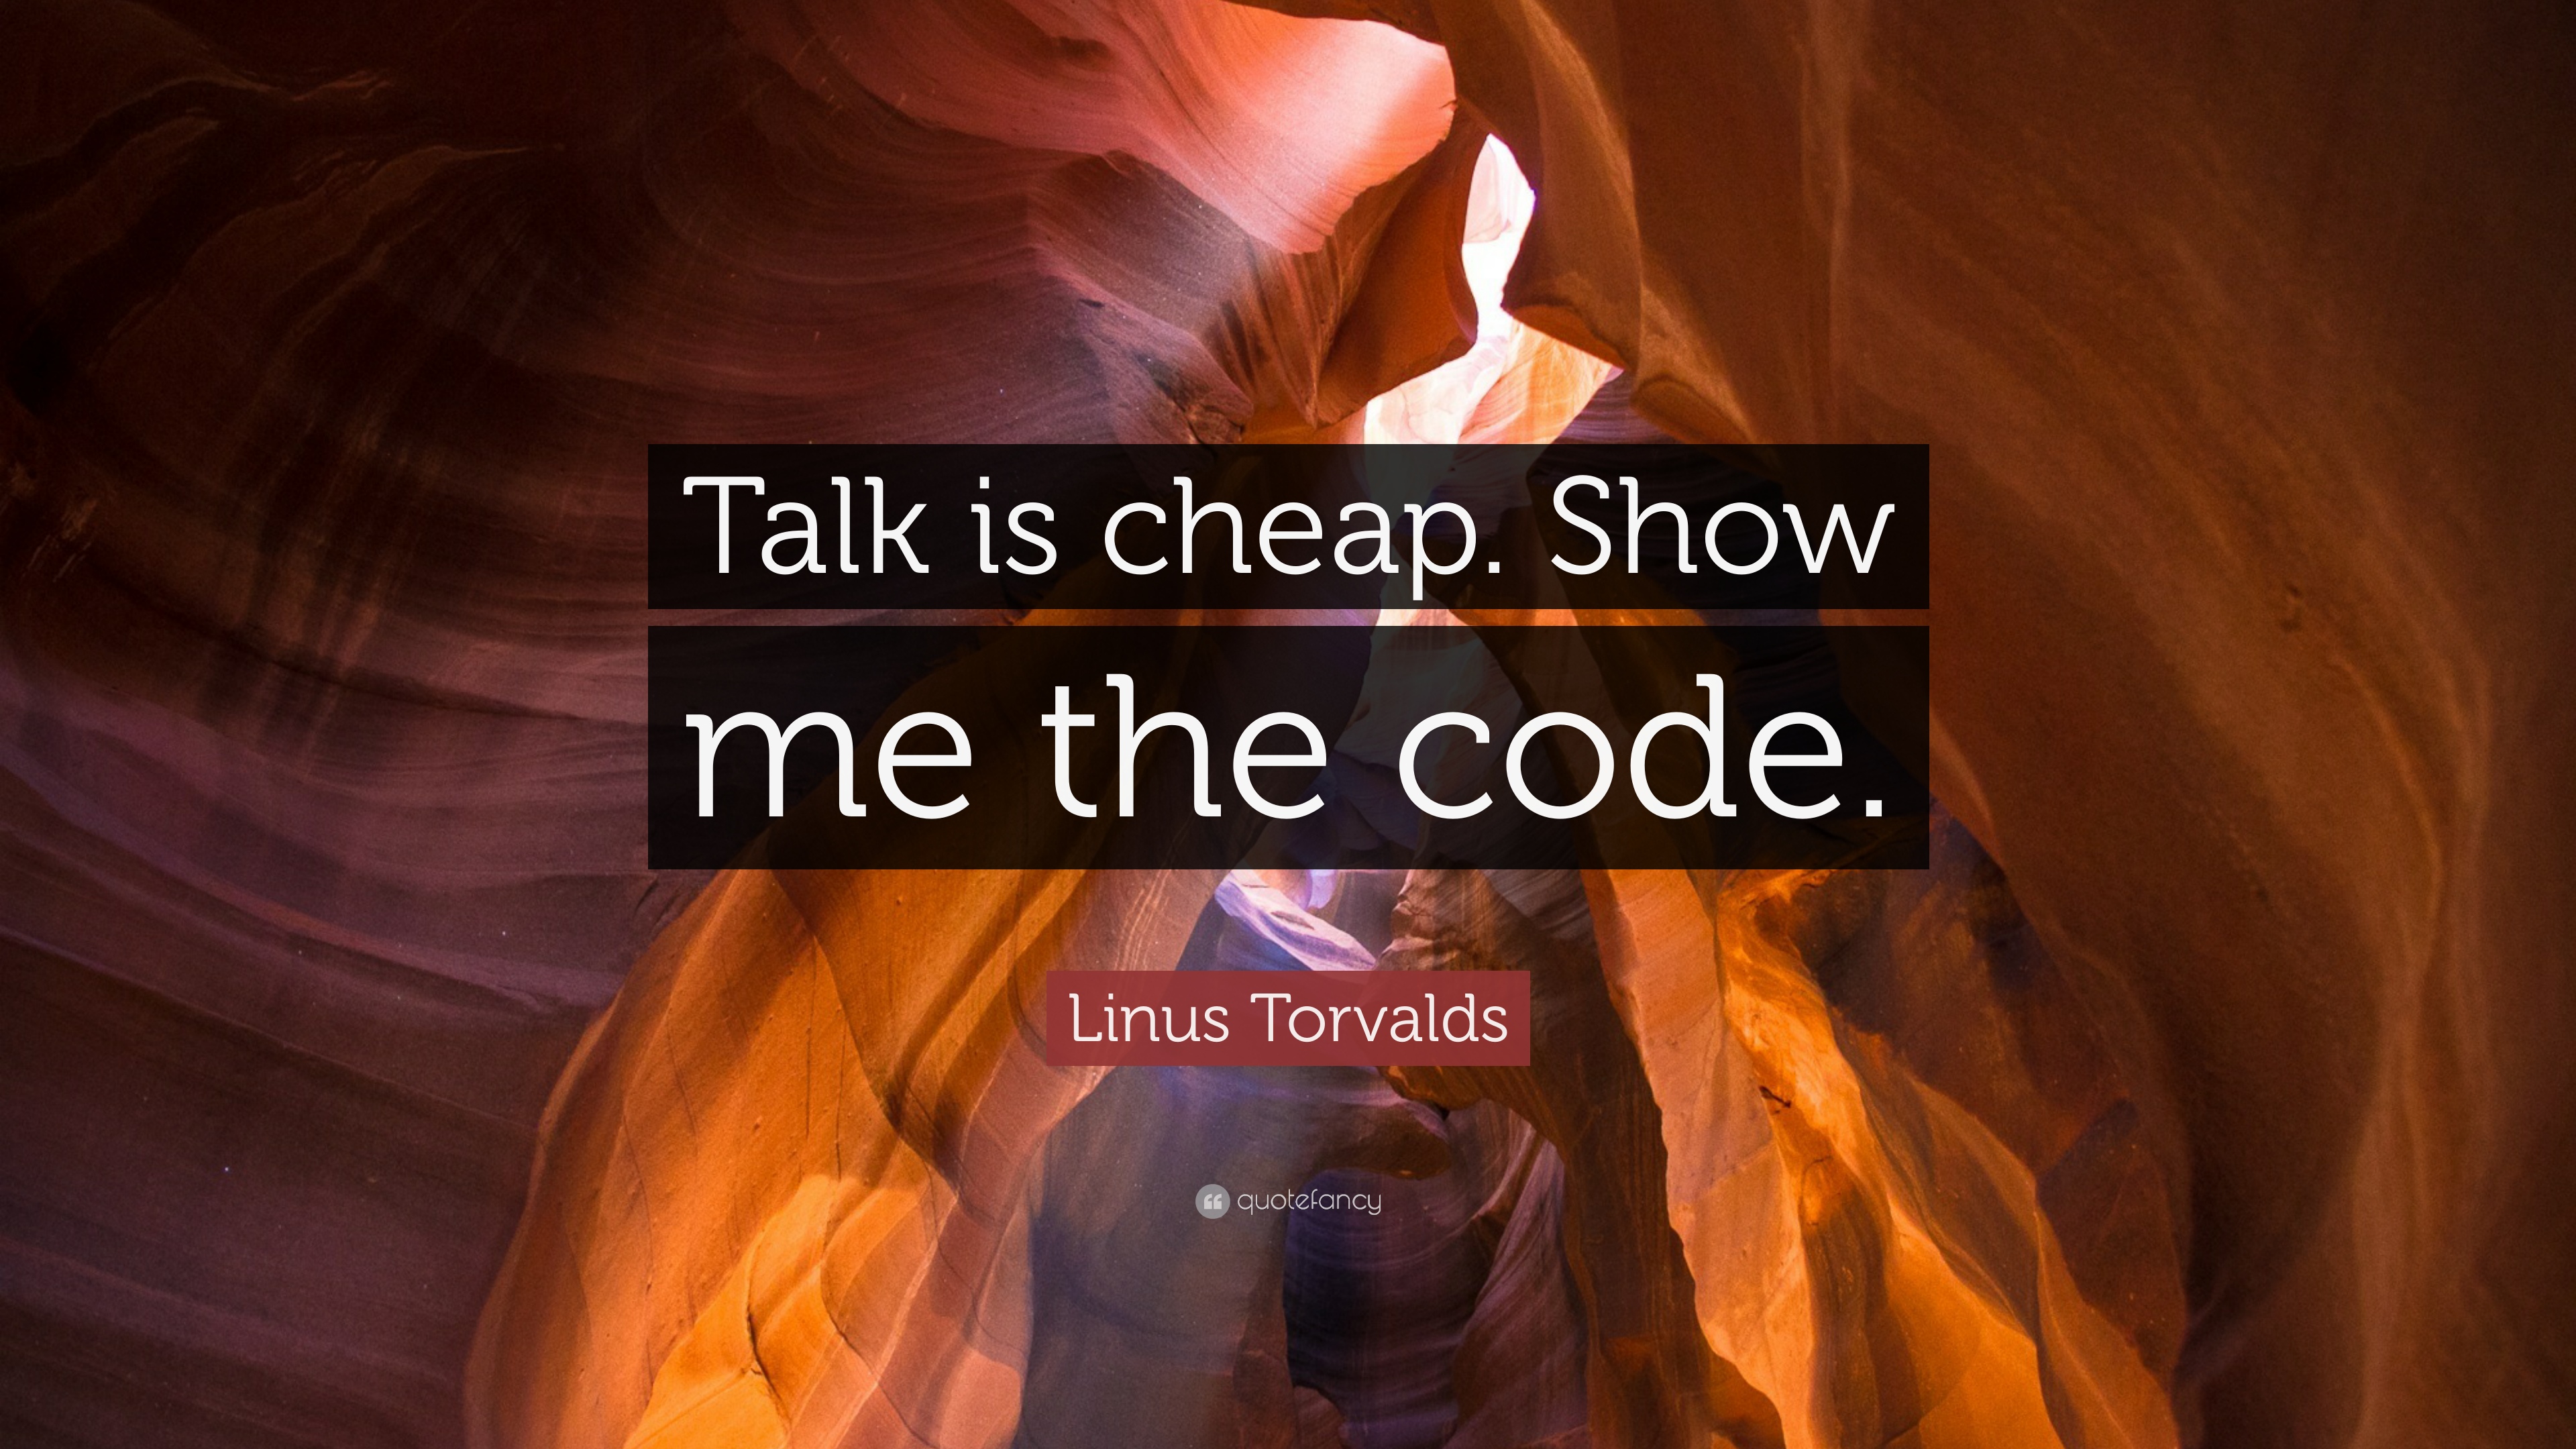 Linus Torvalds Quote: “Talk is cheap. Show me the code.”